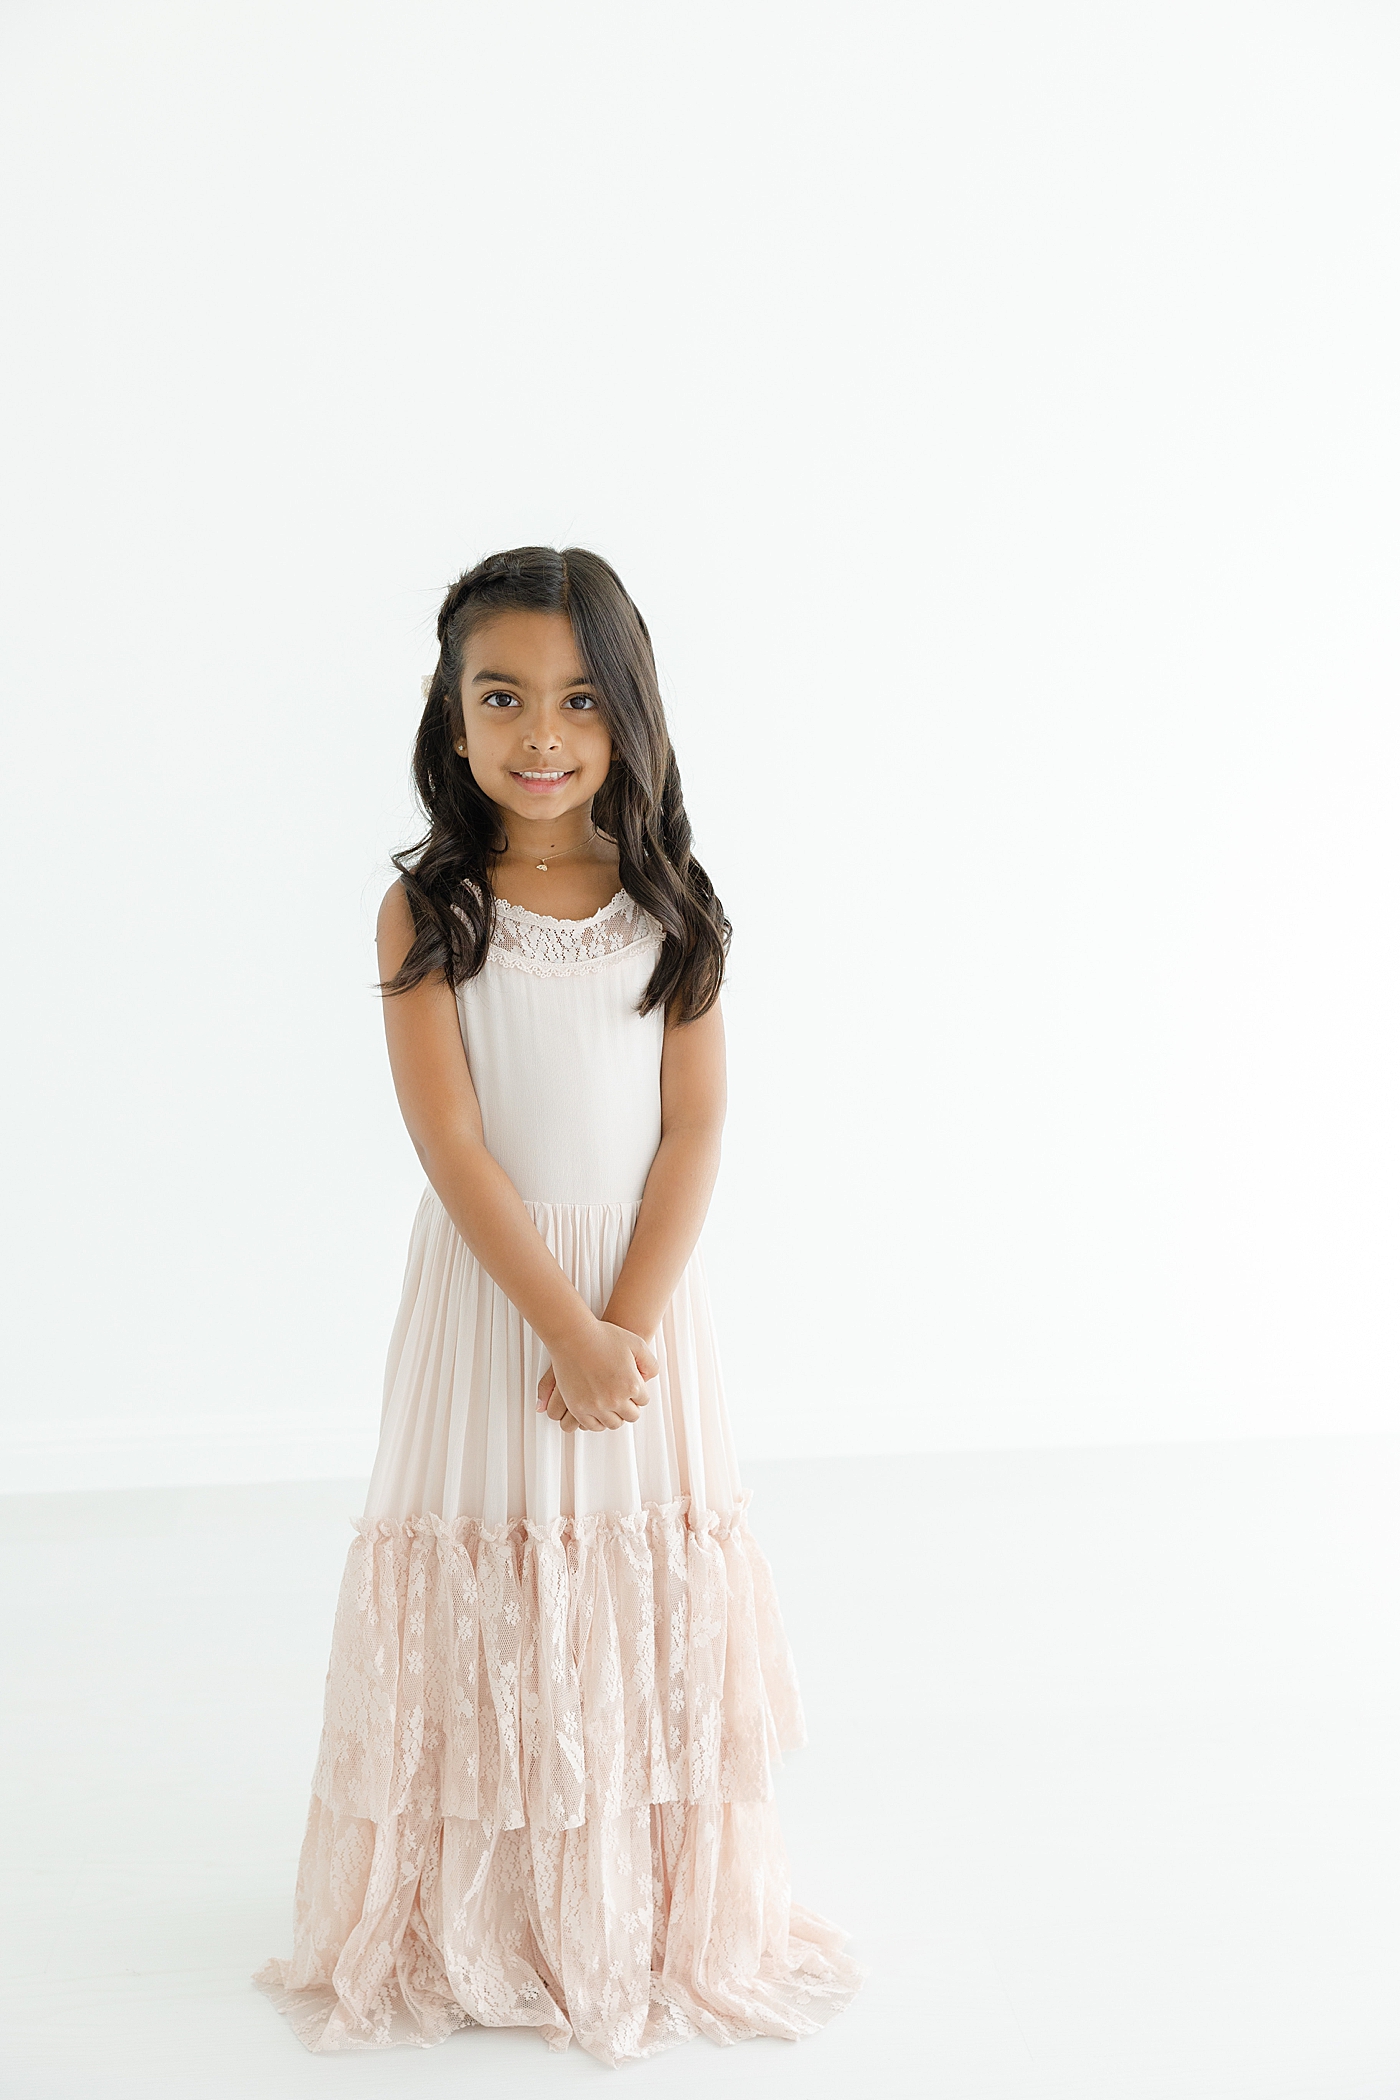 Little girl with dark hair in a long pink light gray dress | Image by Sana Ahmed Photography